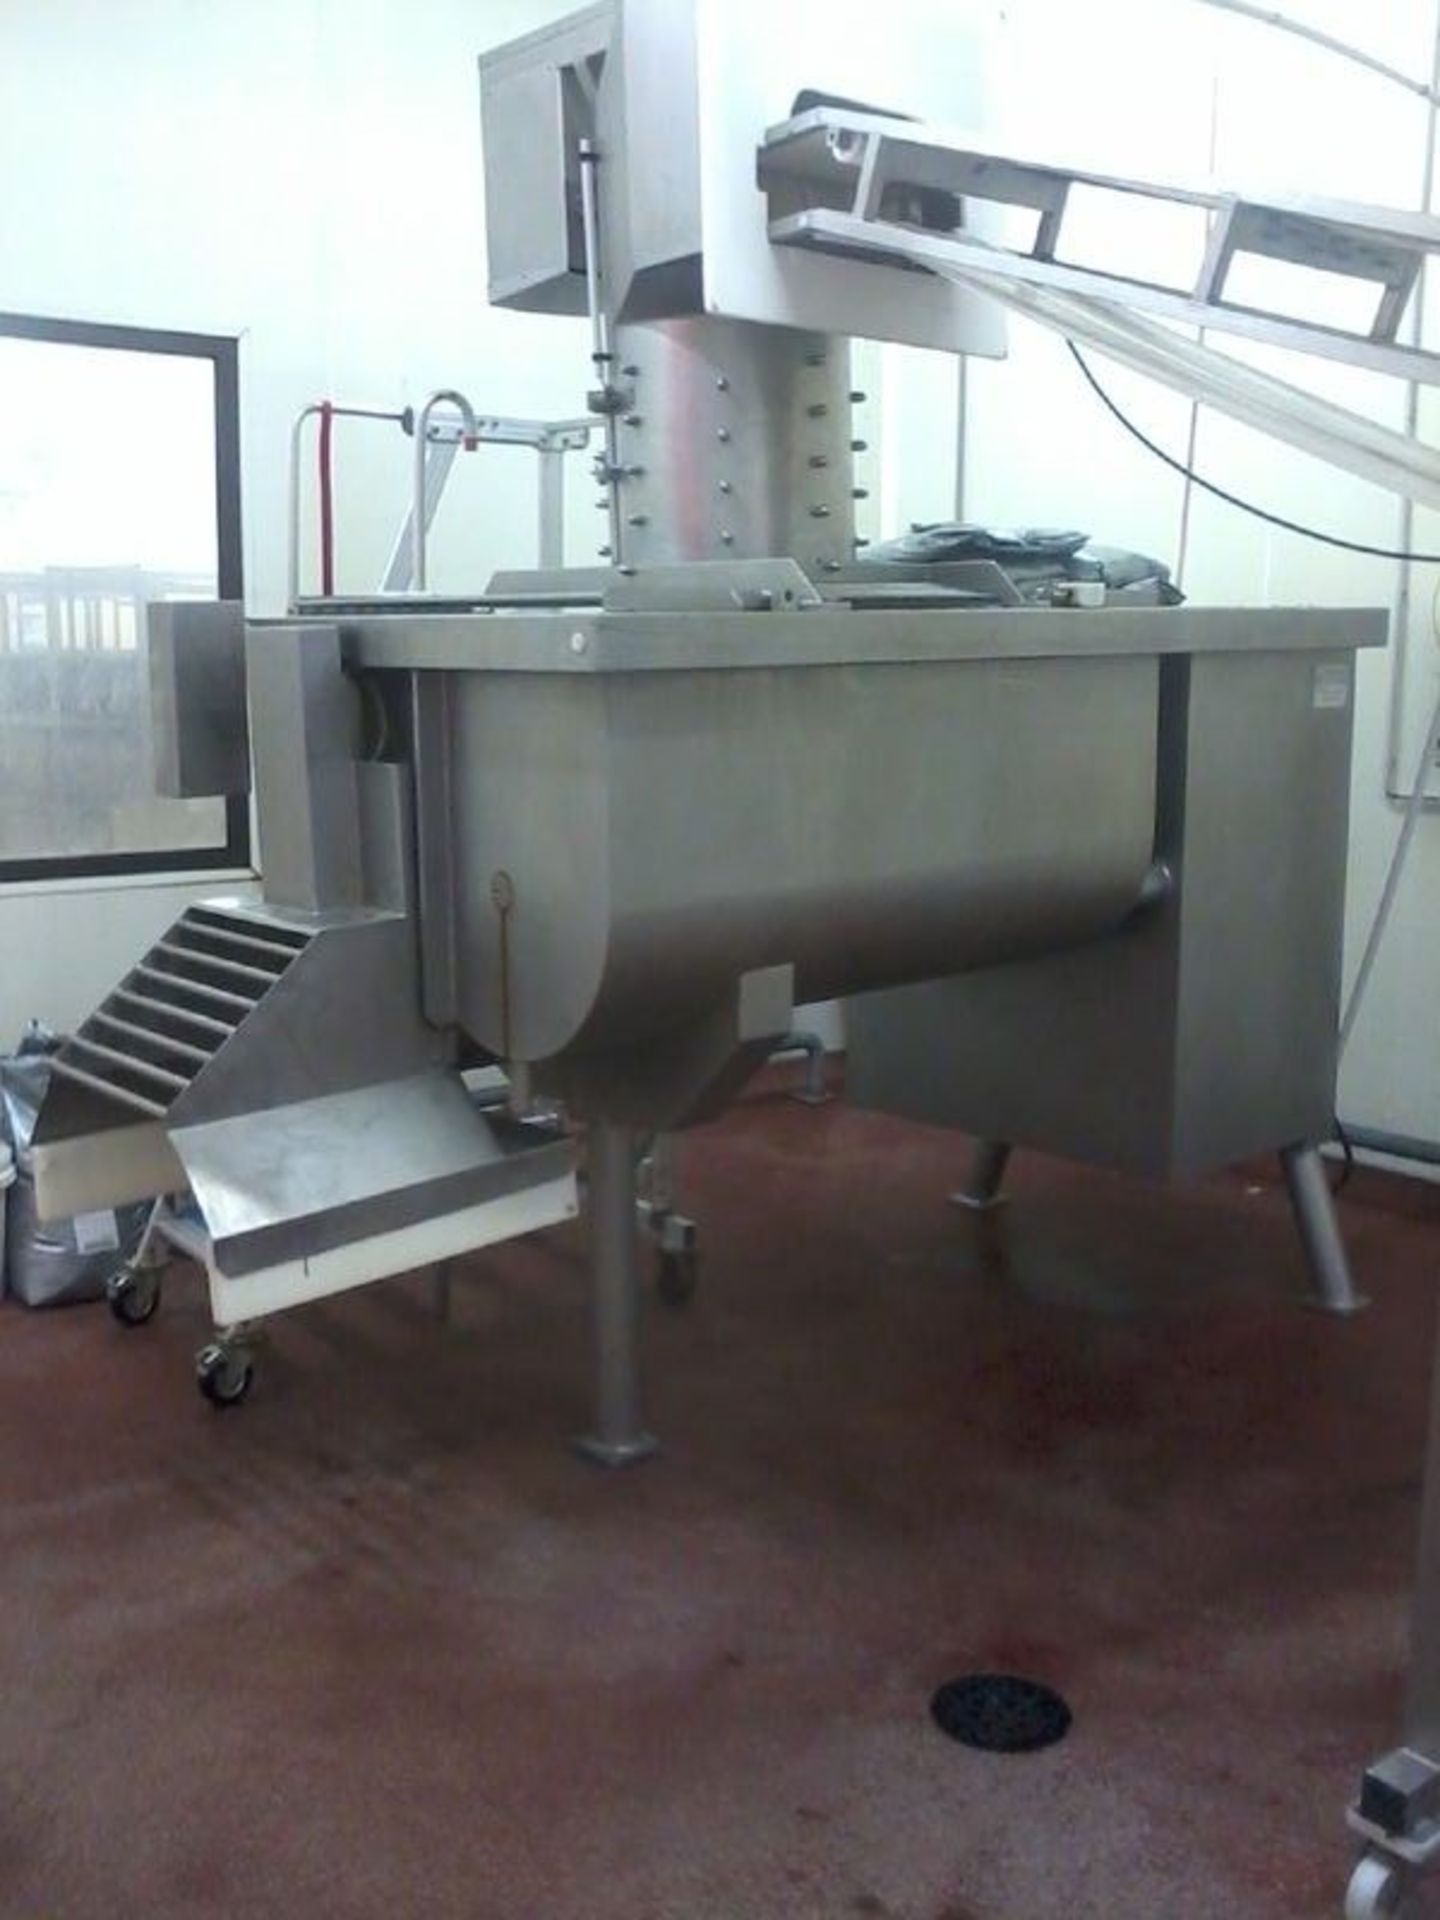 Blade mixer – Brand RISCO – Type RS 1300 LOCATION FRANCE - Image 4 of 5